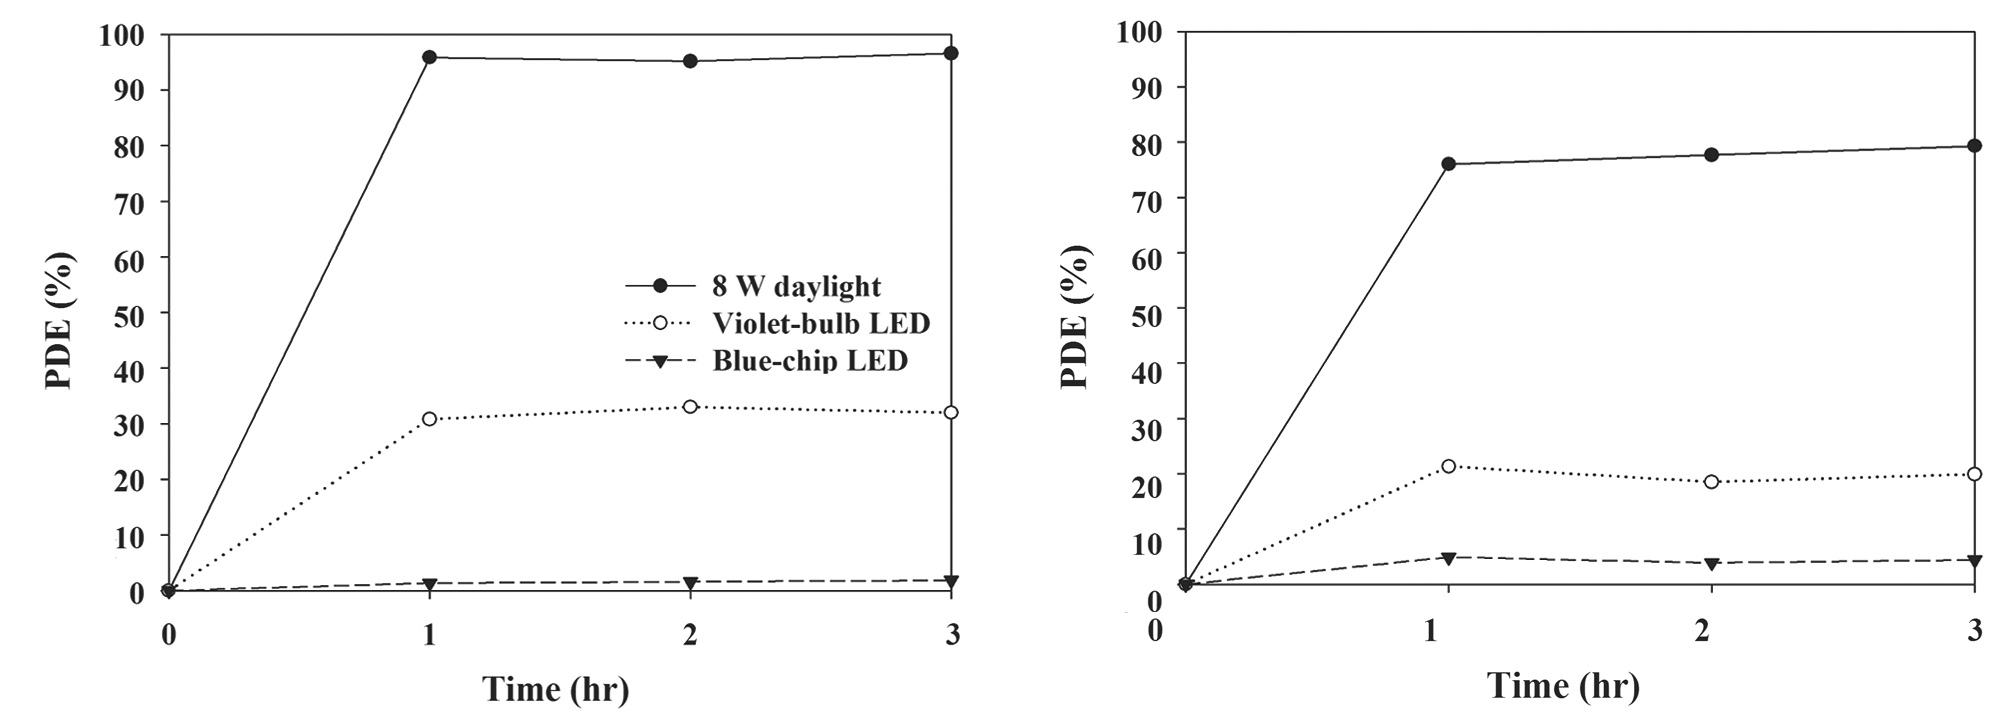 Photocatalytic degradation efficiencies for (a) trichloroethylene and (b) perchloroethylene as determined using a LED-activated N-TiO2 photocatalytic system according to lamp type (8-W fluorescent daylight lamp, blue- and violet-LEDs). LED: light-emitting diode, N-TiO2: Ndoped titanium dioxide, PDE: photocatalytic degradation efficiency.